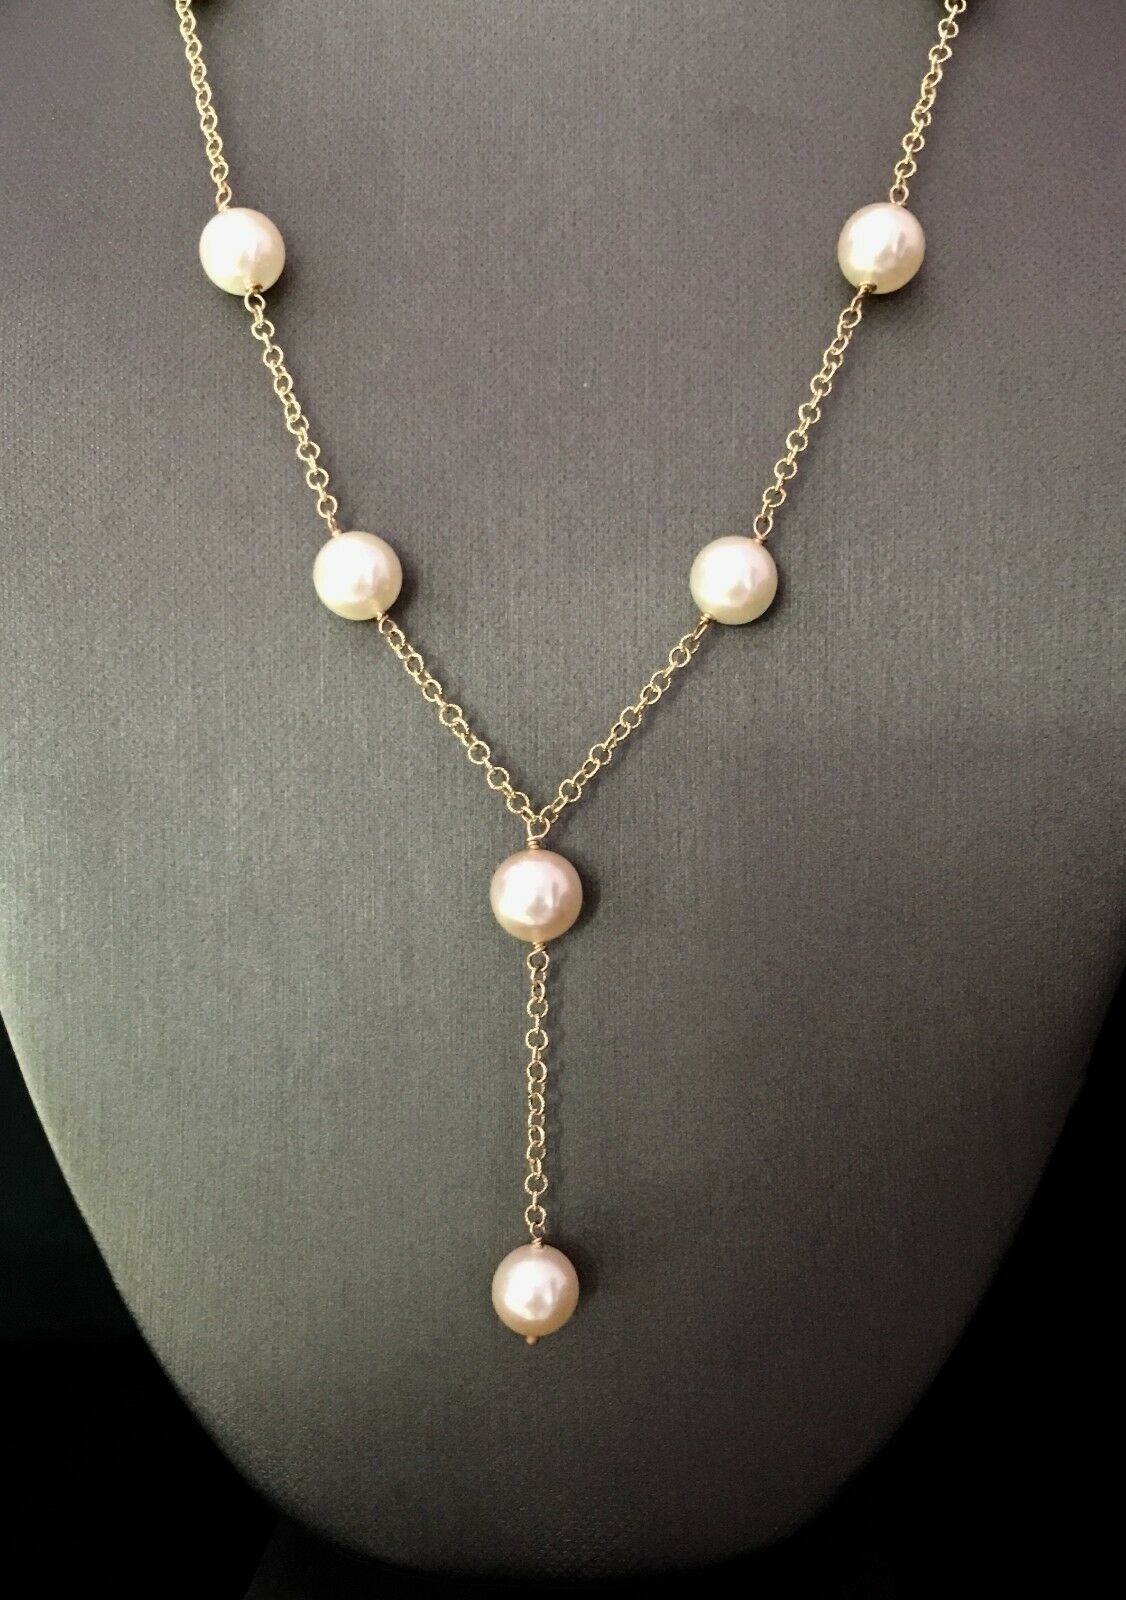 Akoya Pearl Necklace 14k Gold Large 9.5 mm 18.5" Italy Certified $3,950 721475 - Certified Fine Jewelry